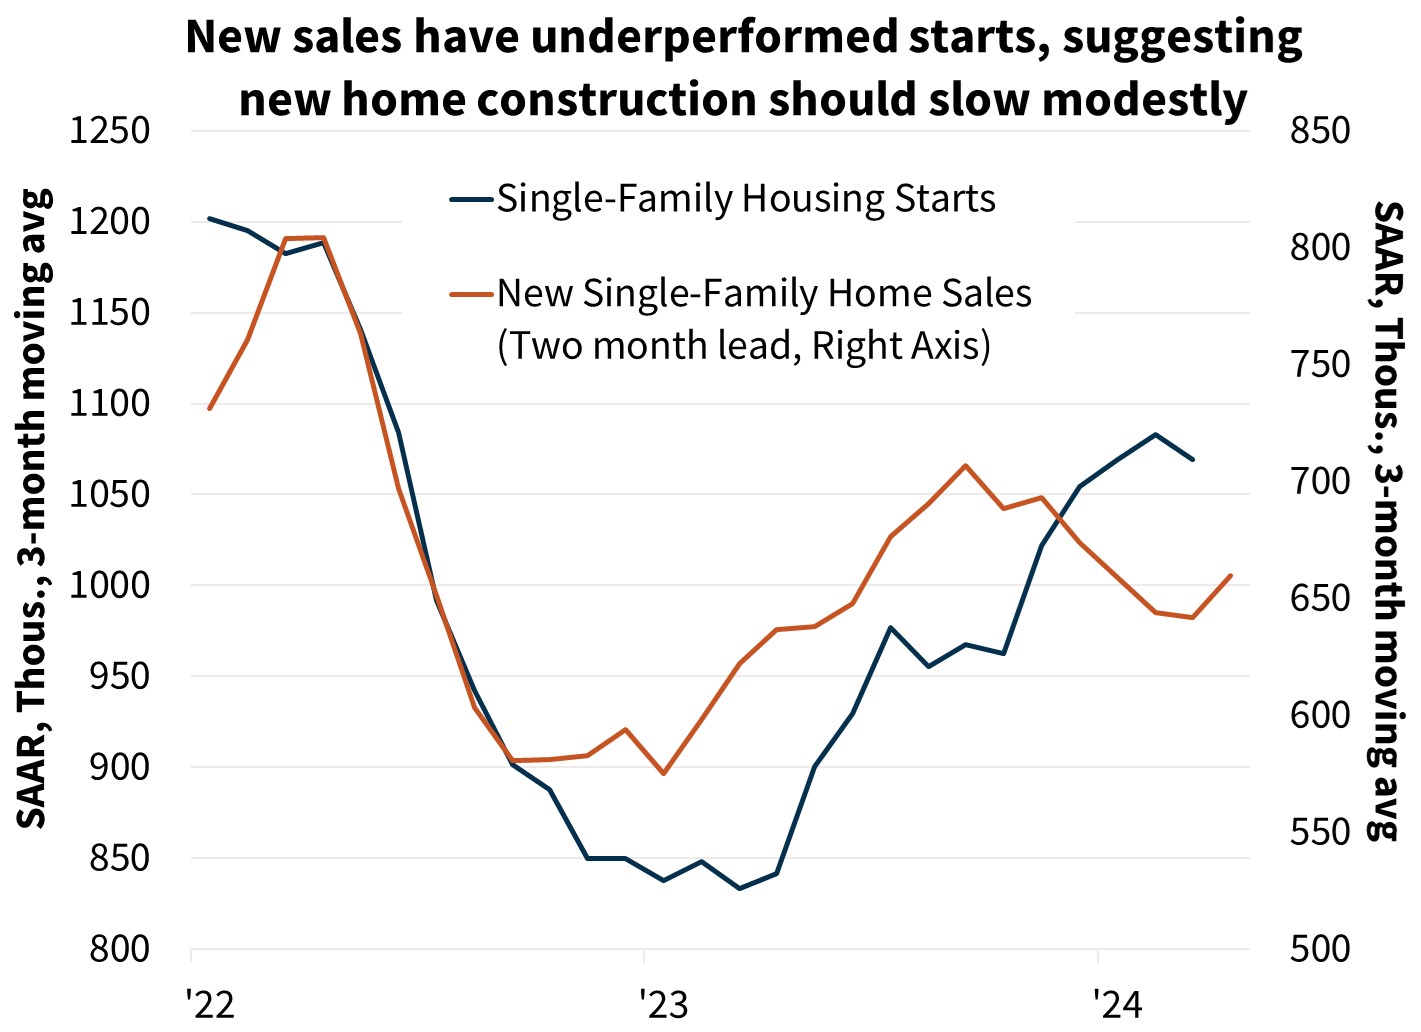 New sales have underperformed starts, suggesting new home construction should slow modestly